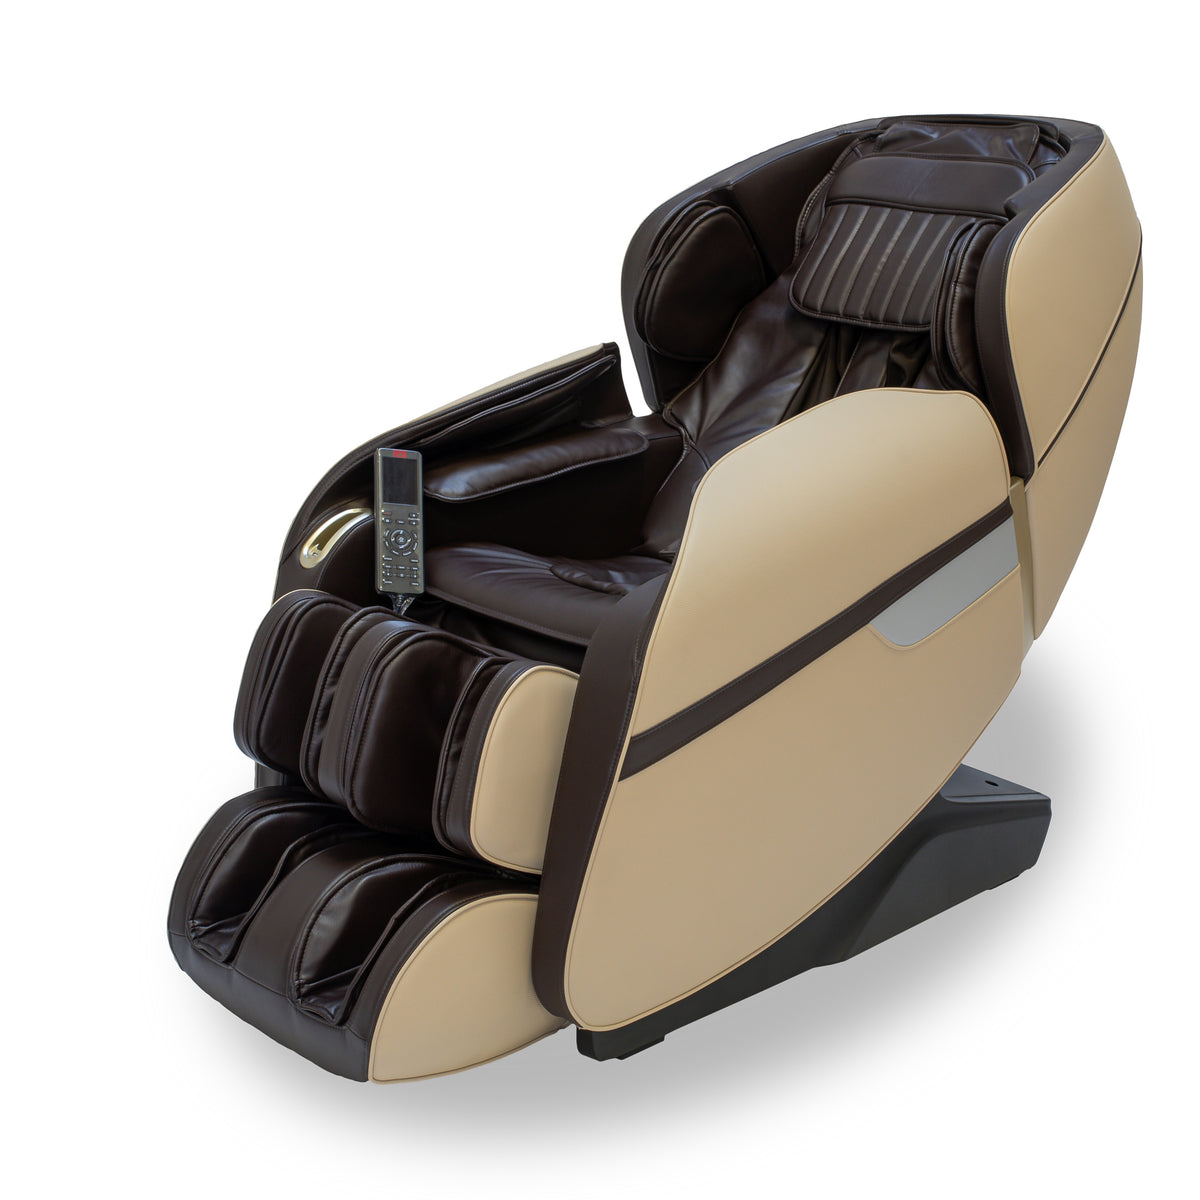 Fujisan MK-9169 3D Massage Chair with Zero Gravity and Heating Functio